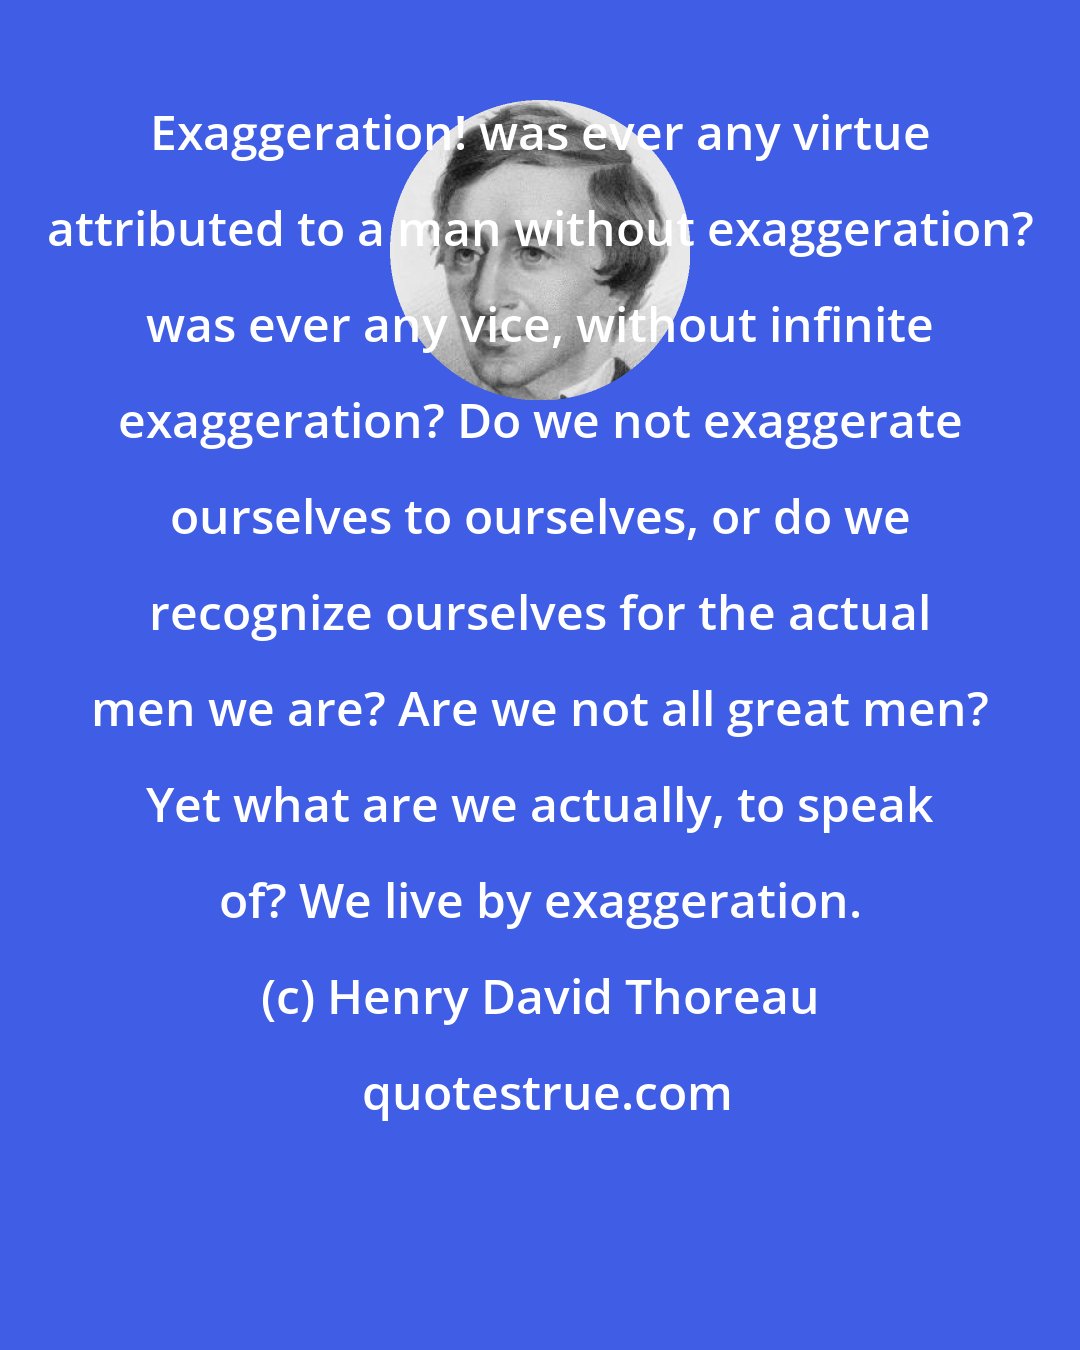 Henry David Thoreau: Exaggeration! was ever any virtue attributed to a man without exaggeration? was ever any vice, without infinite exaggeration? Do we not exaggerate ourselves to ourselves, or do we recognize ourselves for the actual men we are? Are we not all great men? Yet what are we actually, to speak of? We live by exaggeration.